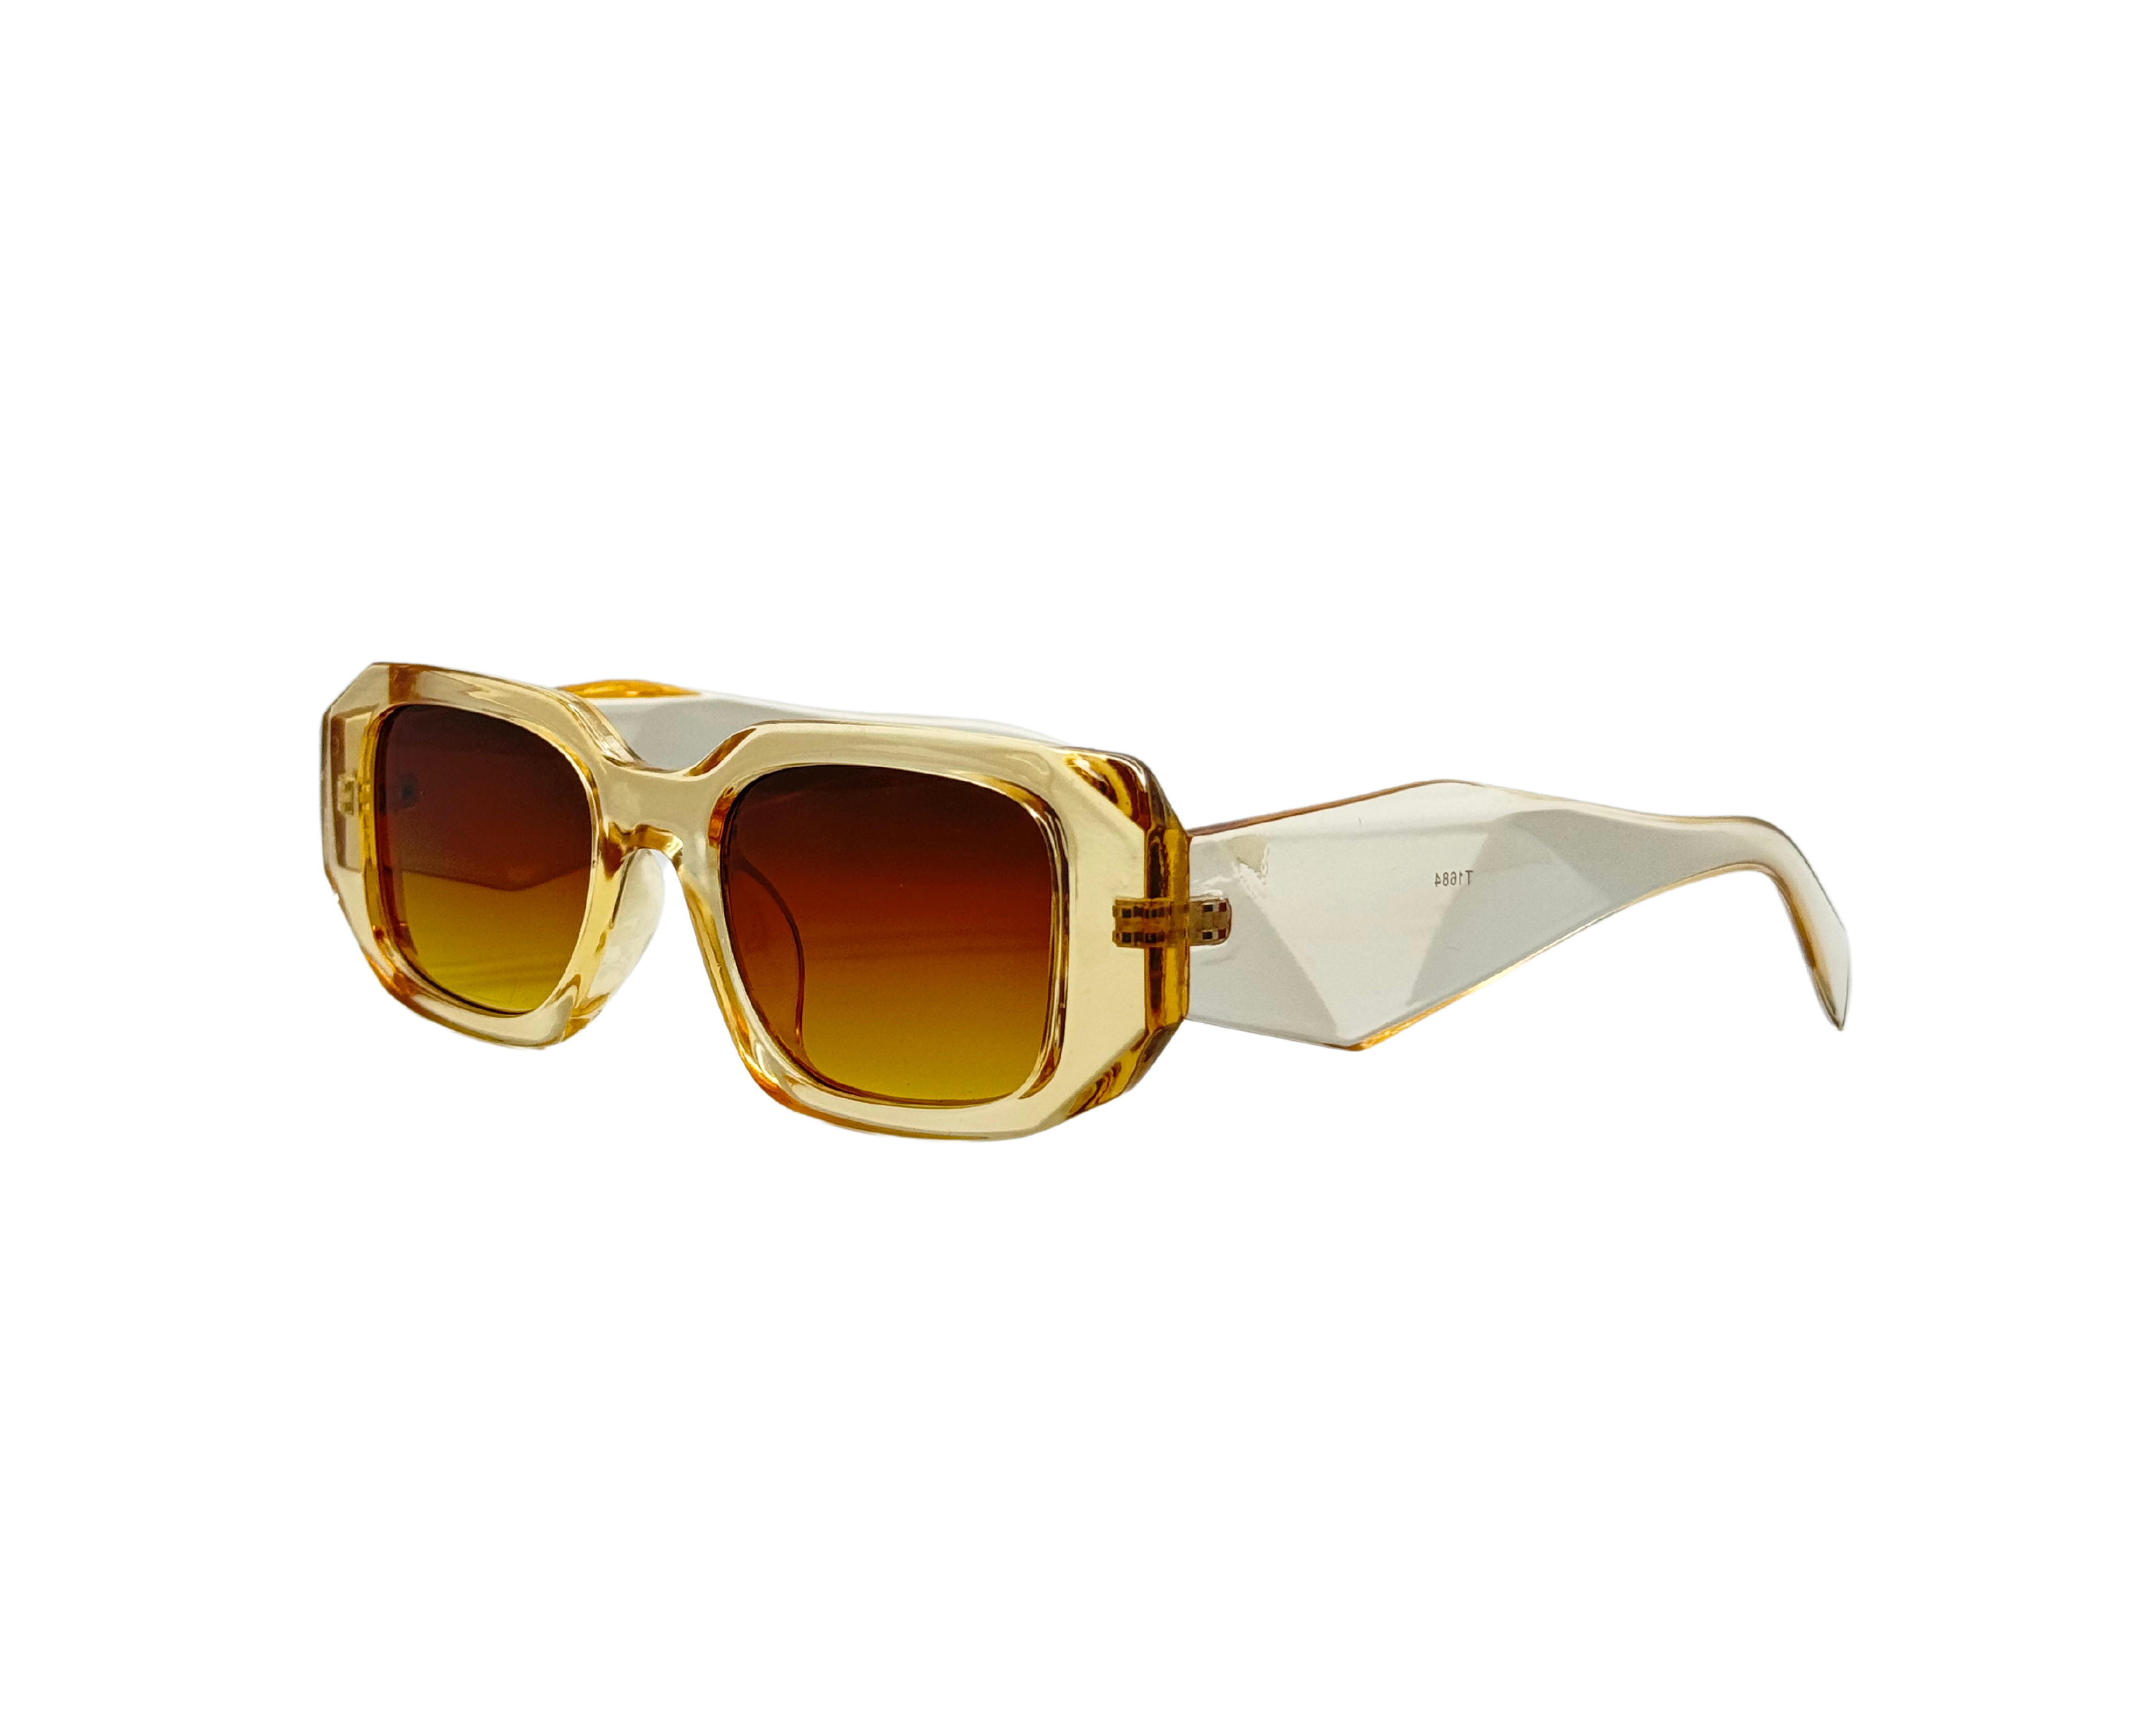 NS Deluxe - 1684 - Light Brown - Sunglasses